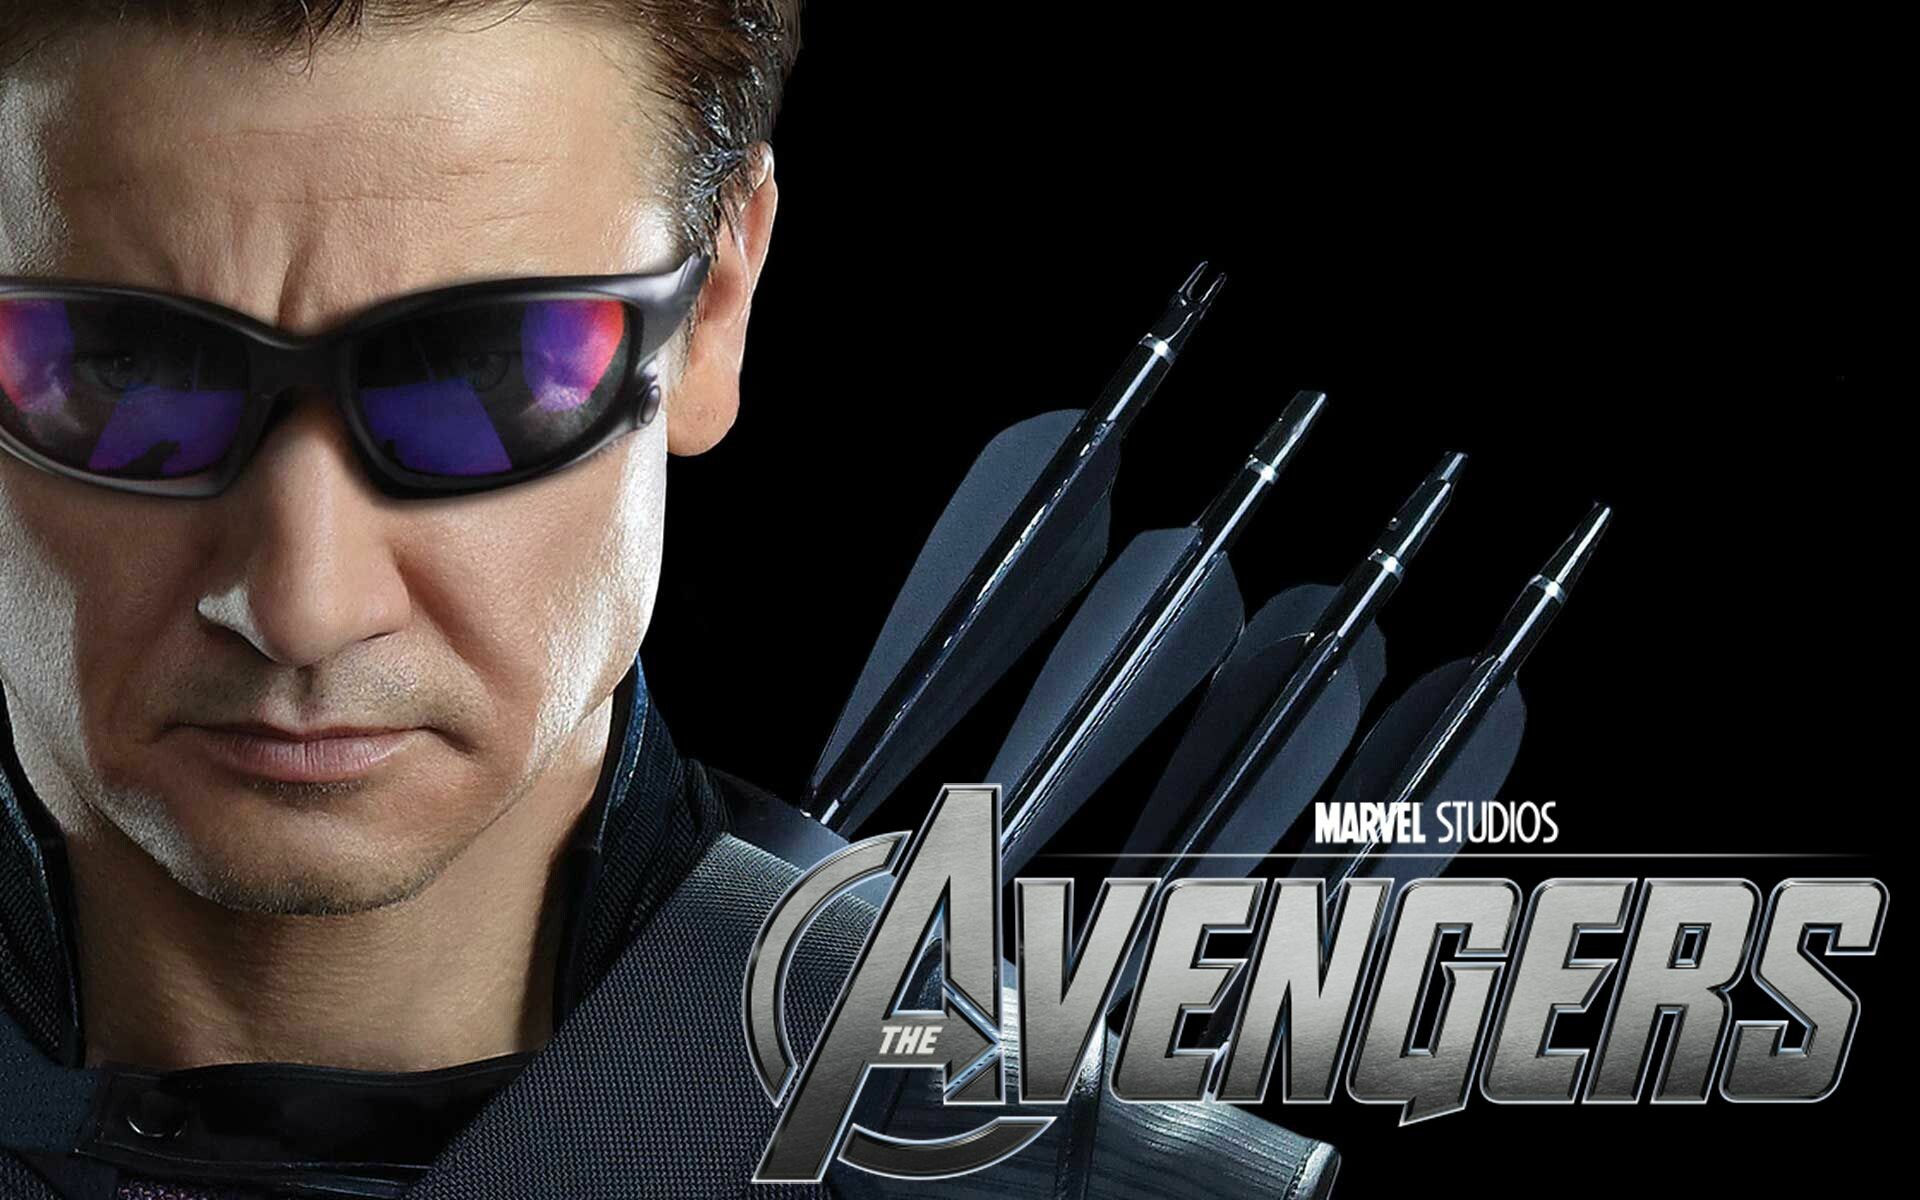 Hawkeye: Avengers, A master archer working as an agent for S.H.I.E.L.D. 1920x1200 HD Background.